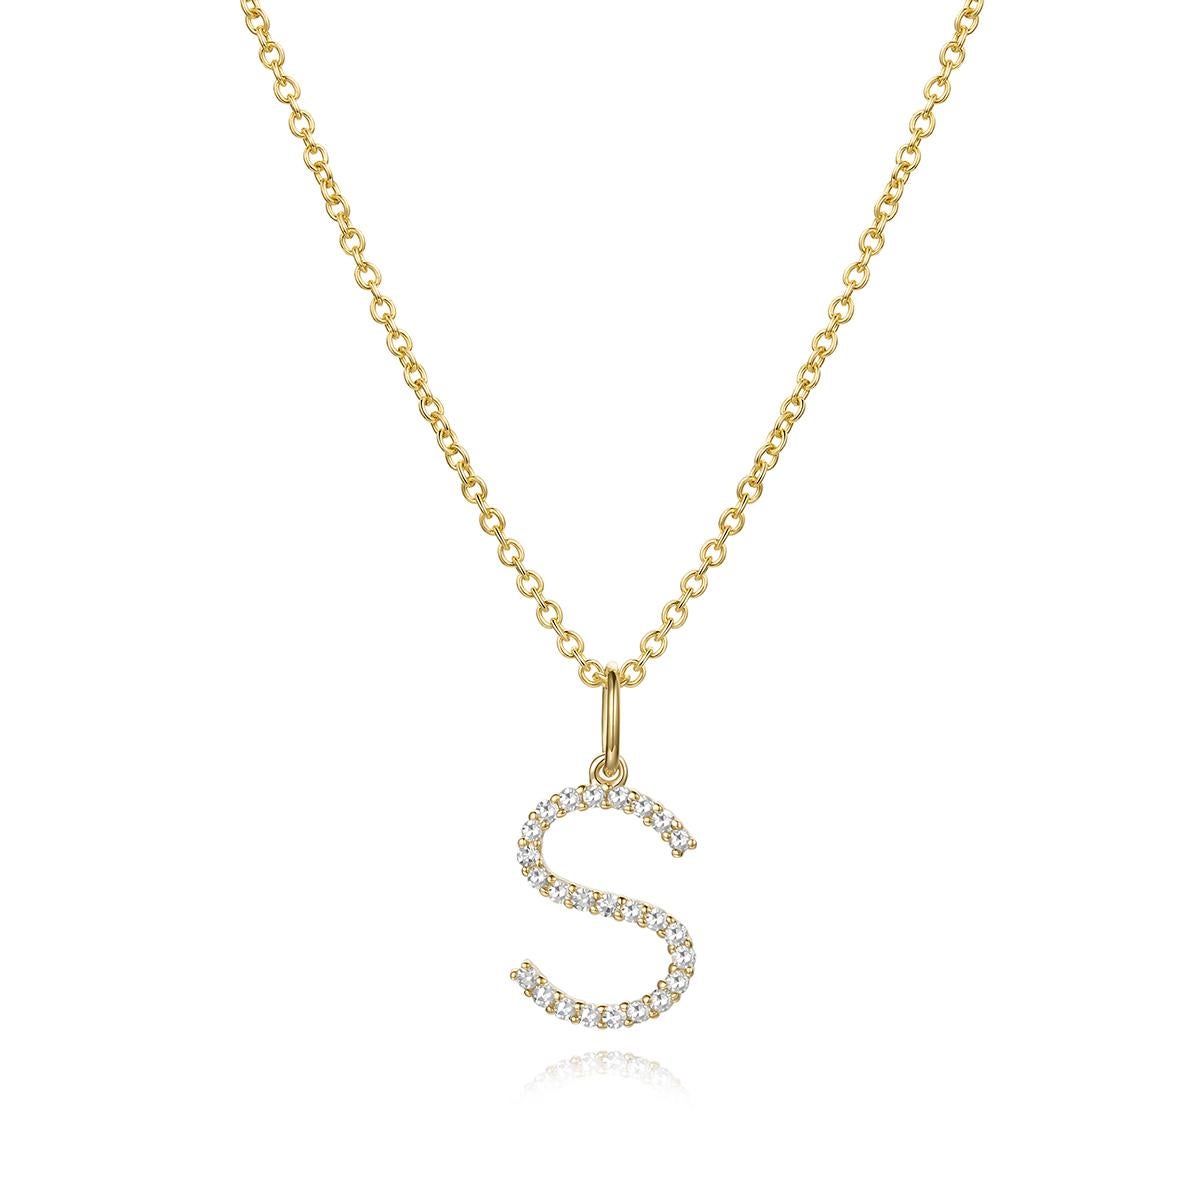 Sienna's Initial Necklace In New Condition For Sale In Los Angeles, CA